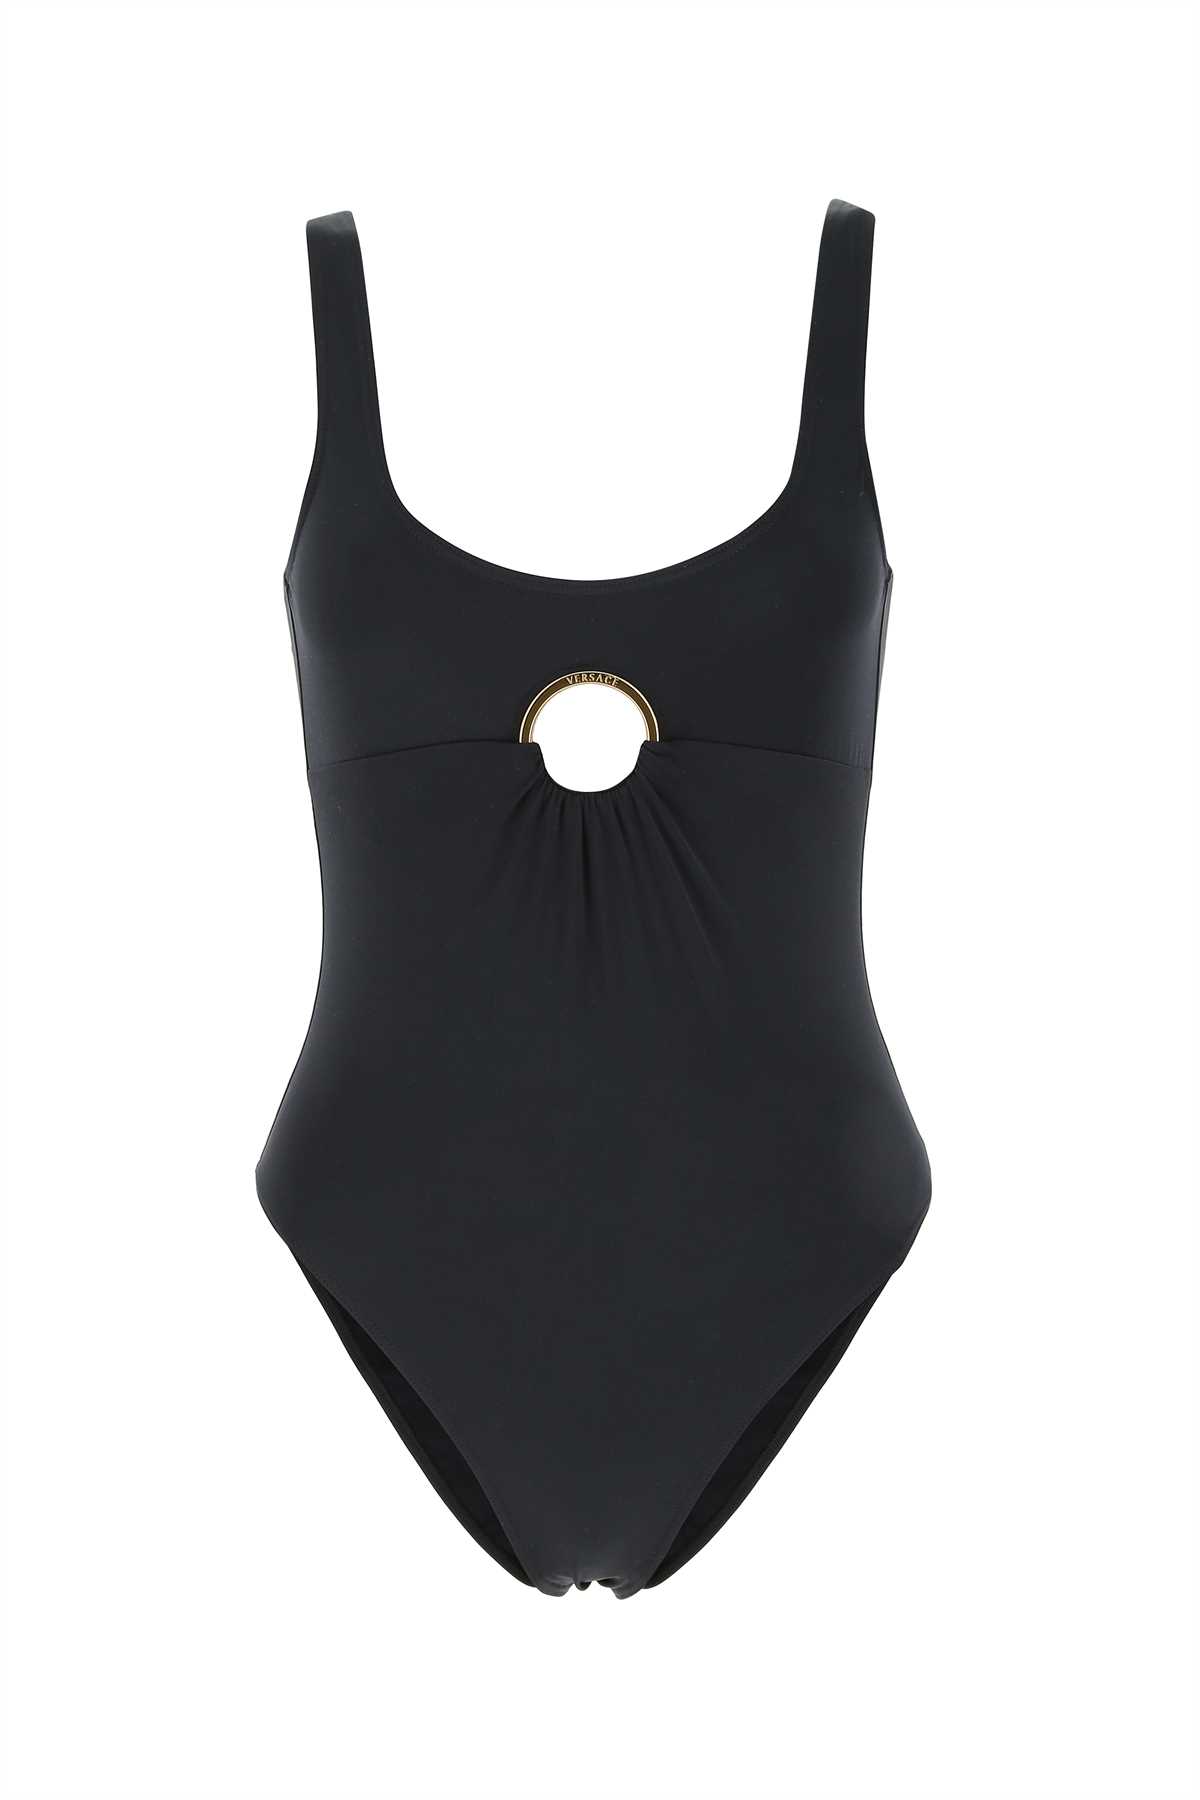 Versace Black Stretch Nylon Swimsuit In A1008